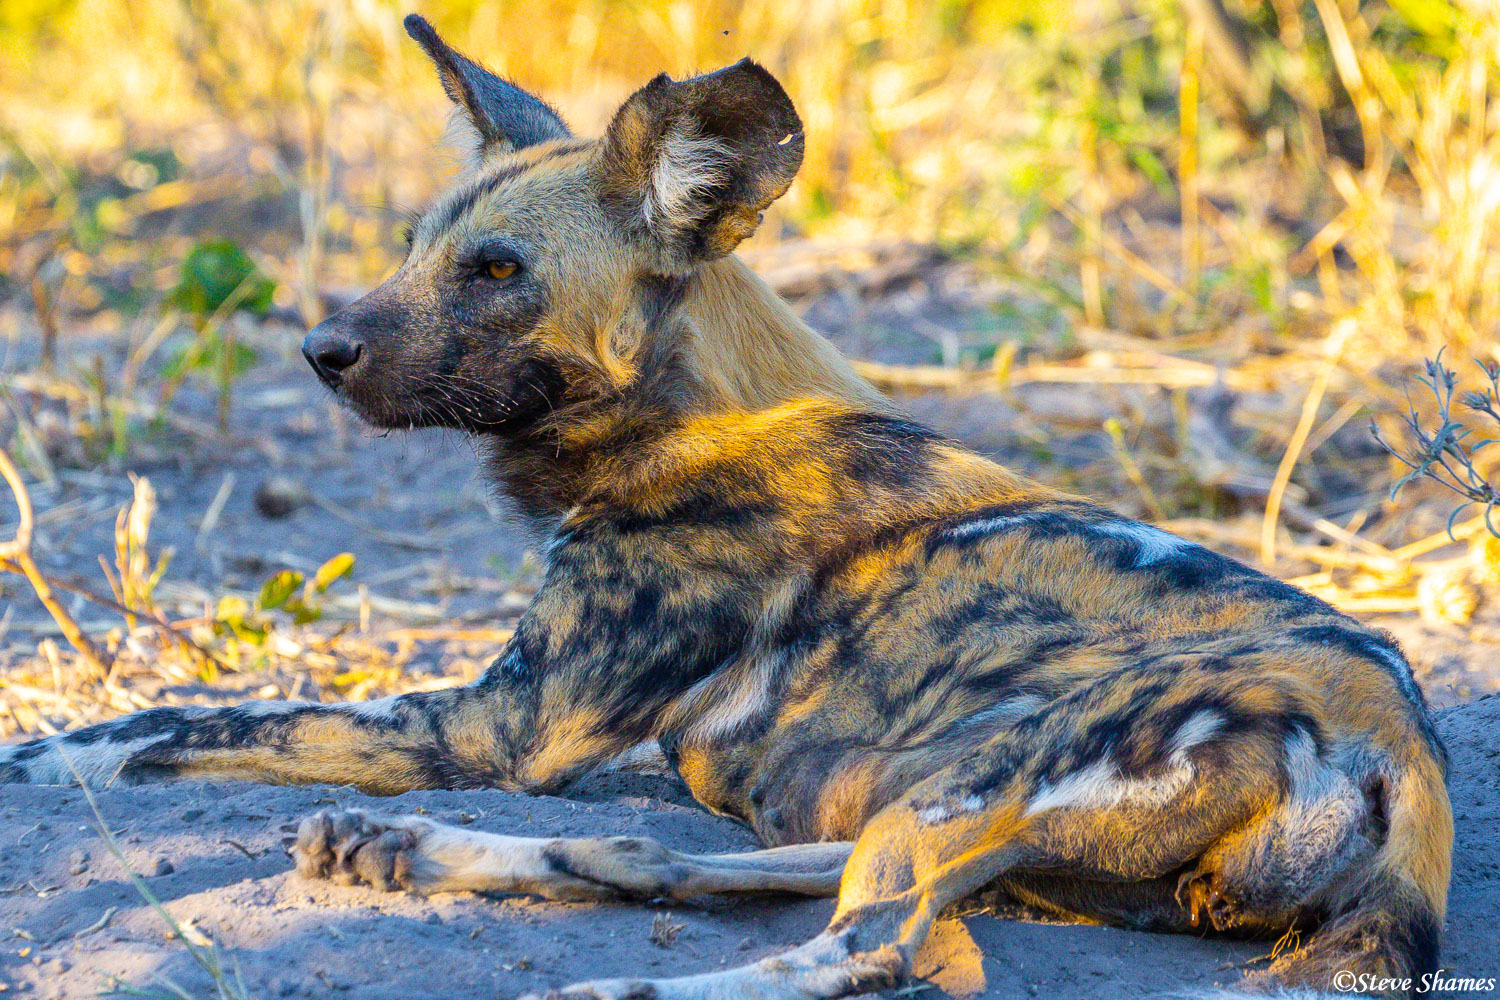 Here is an African wild hunting dog. There are not many of these left, so it is rare to see them.